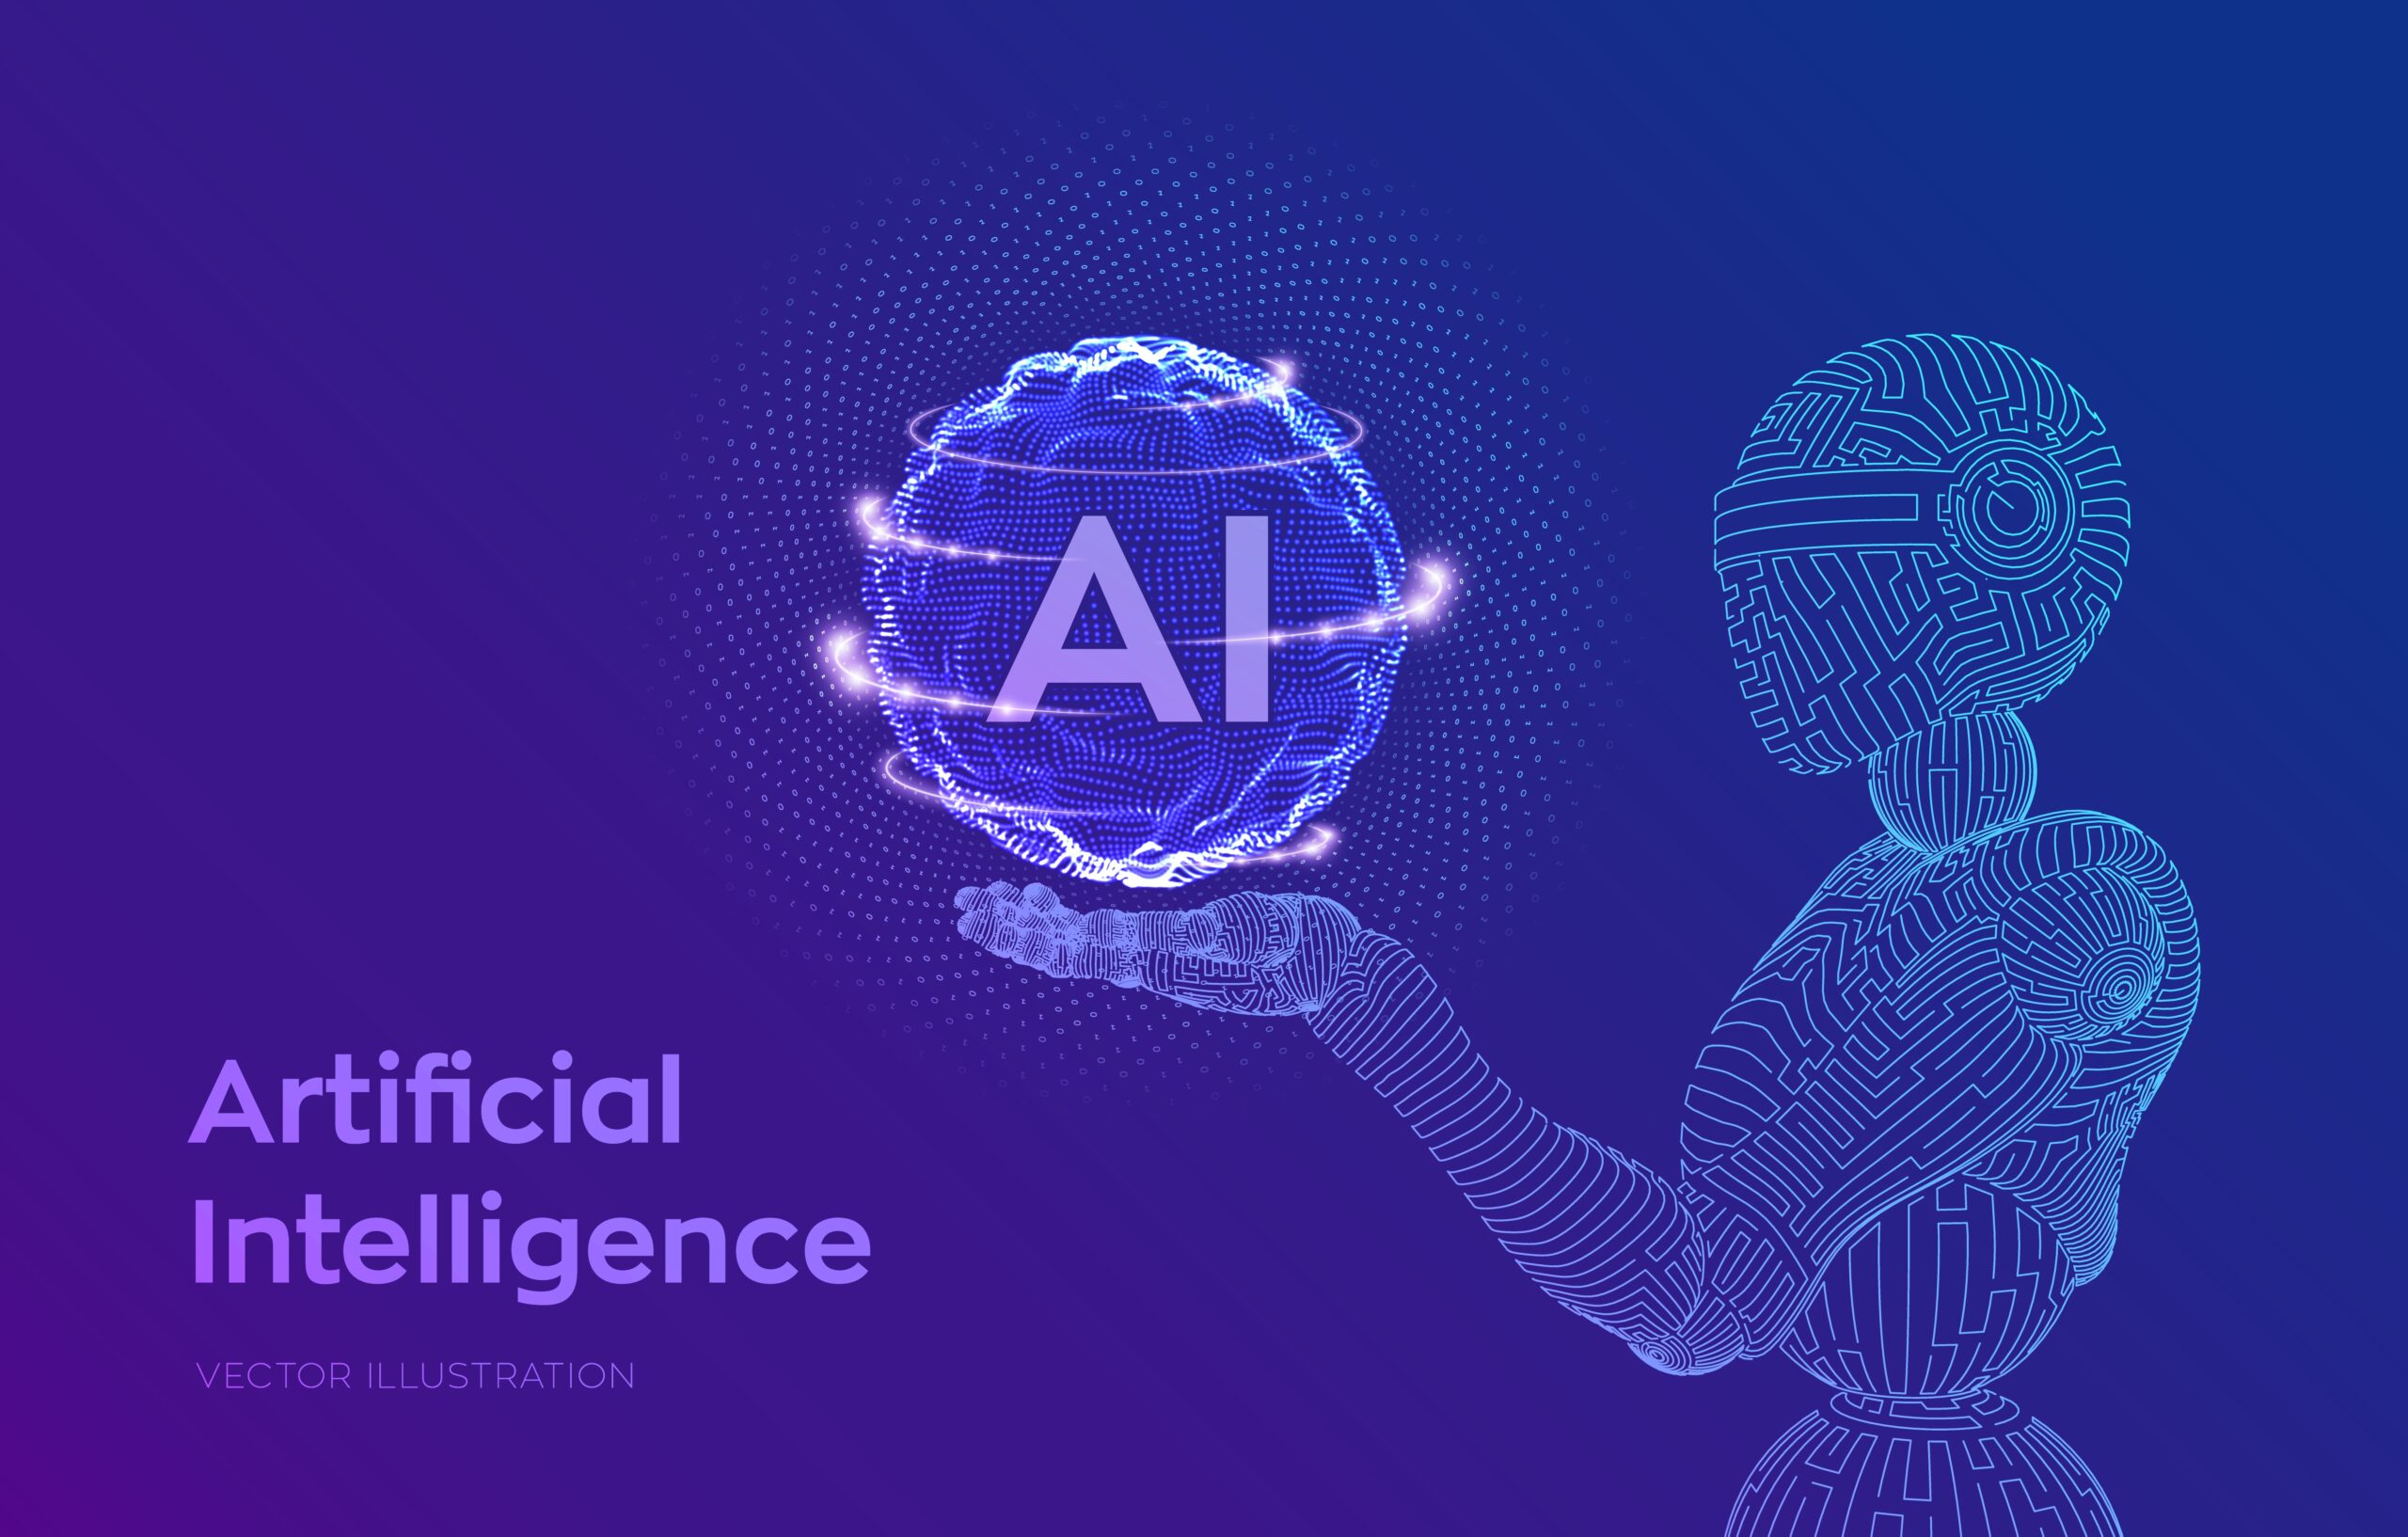 The Ultimate Guide to Artificial Intelligence and Machine Learning